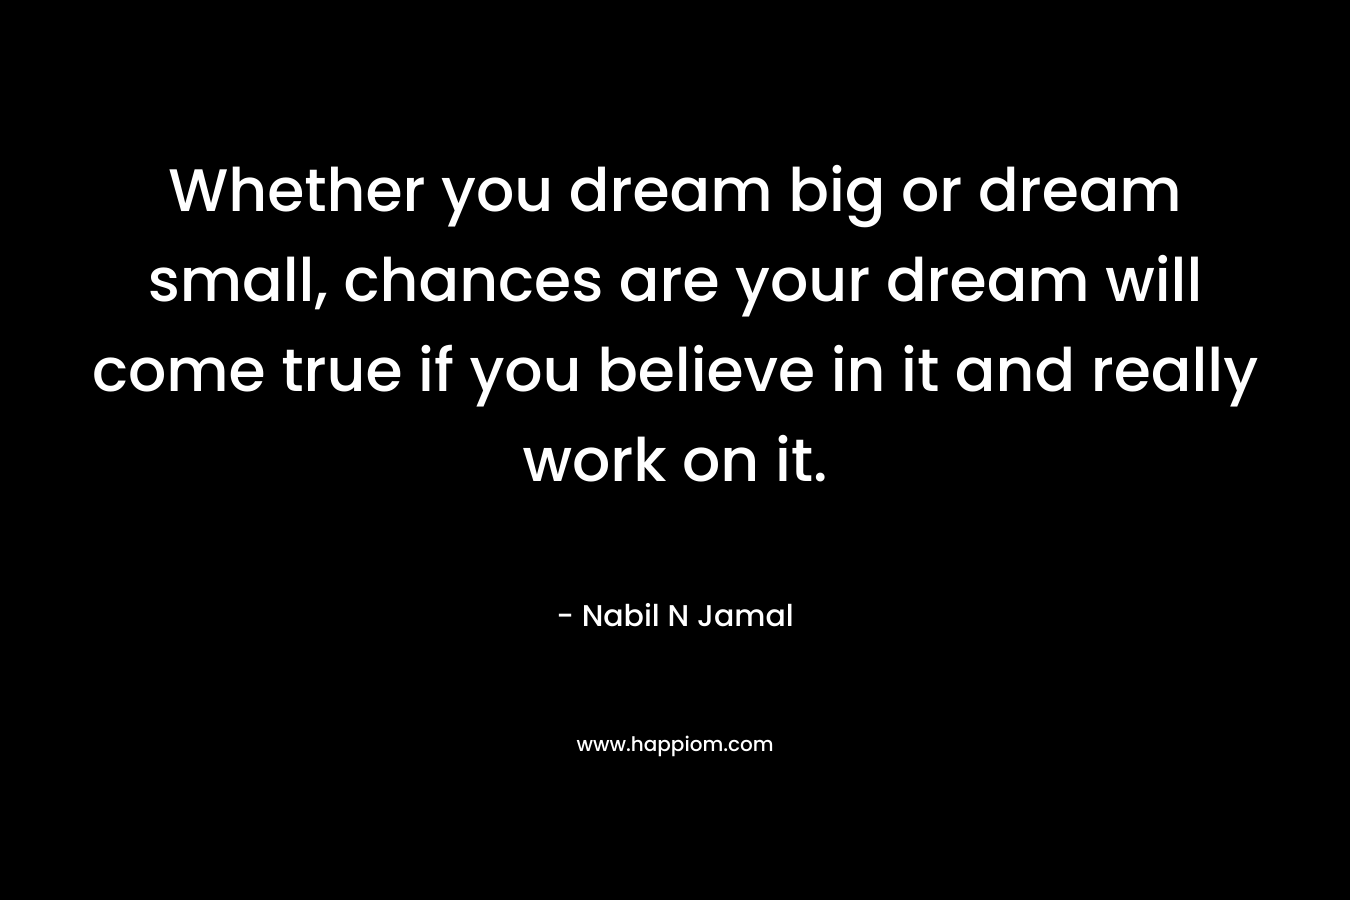 Whether you dream big or dream small, chances are your dream will come true if you believe in it and really work on it.